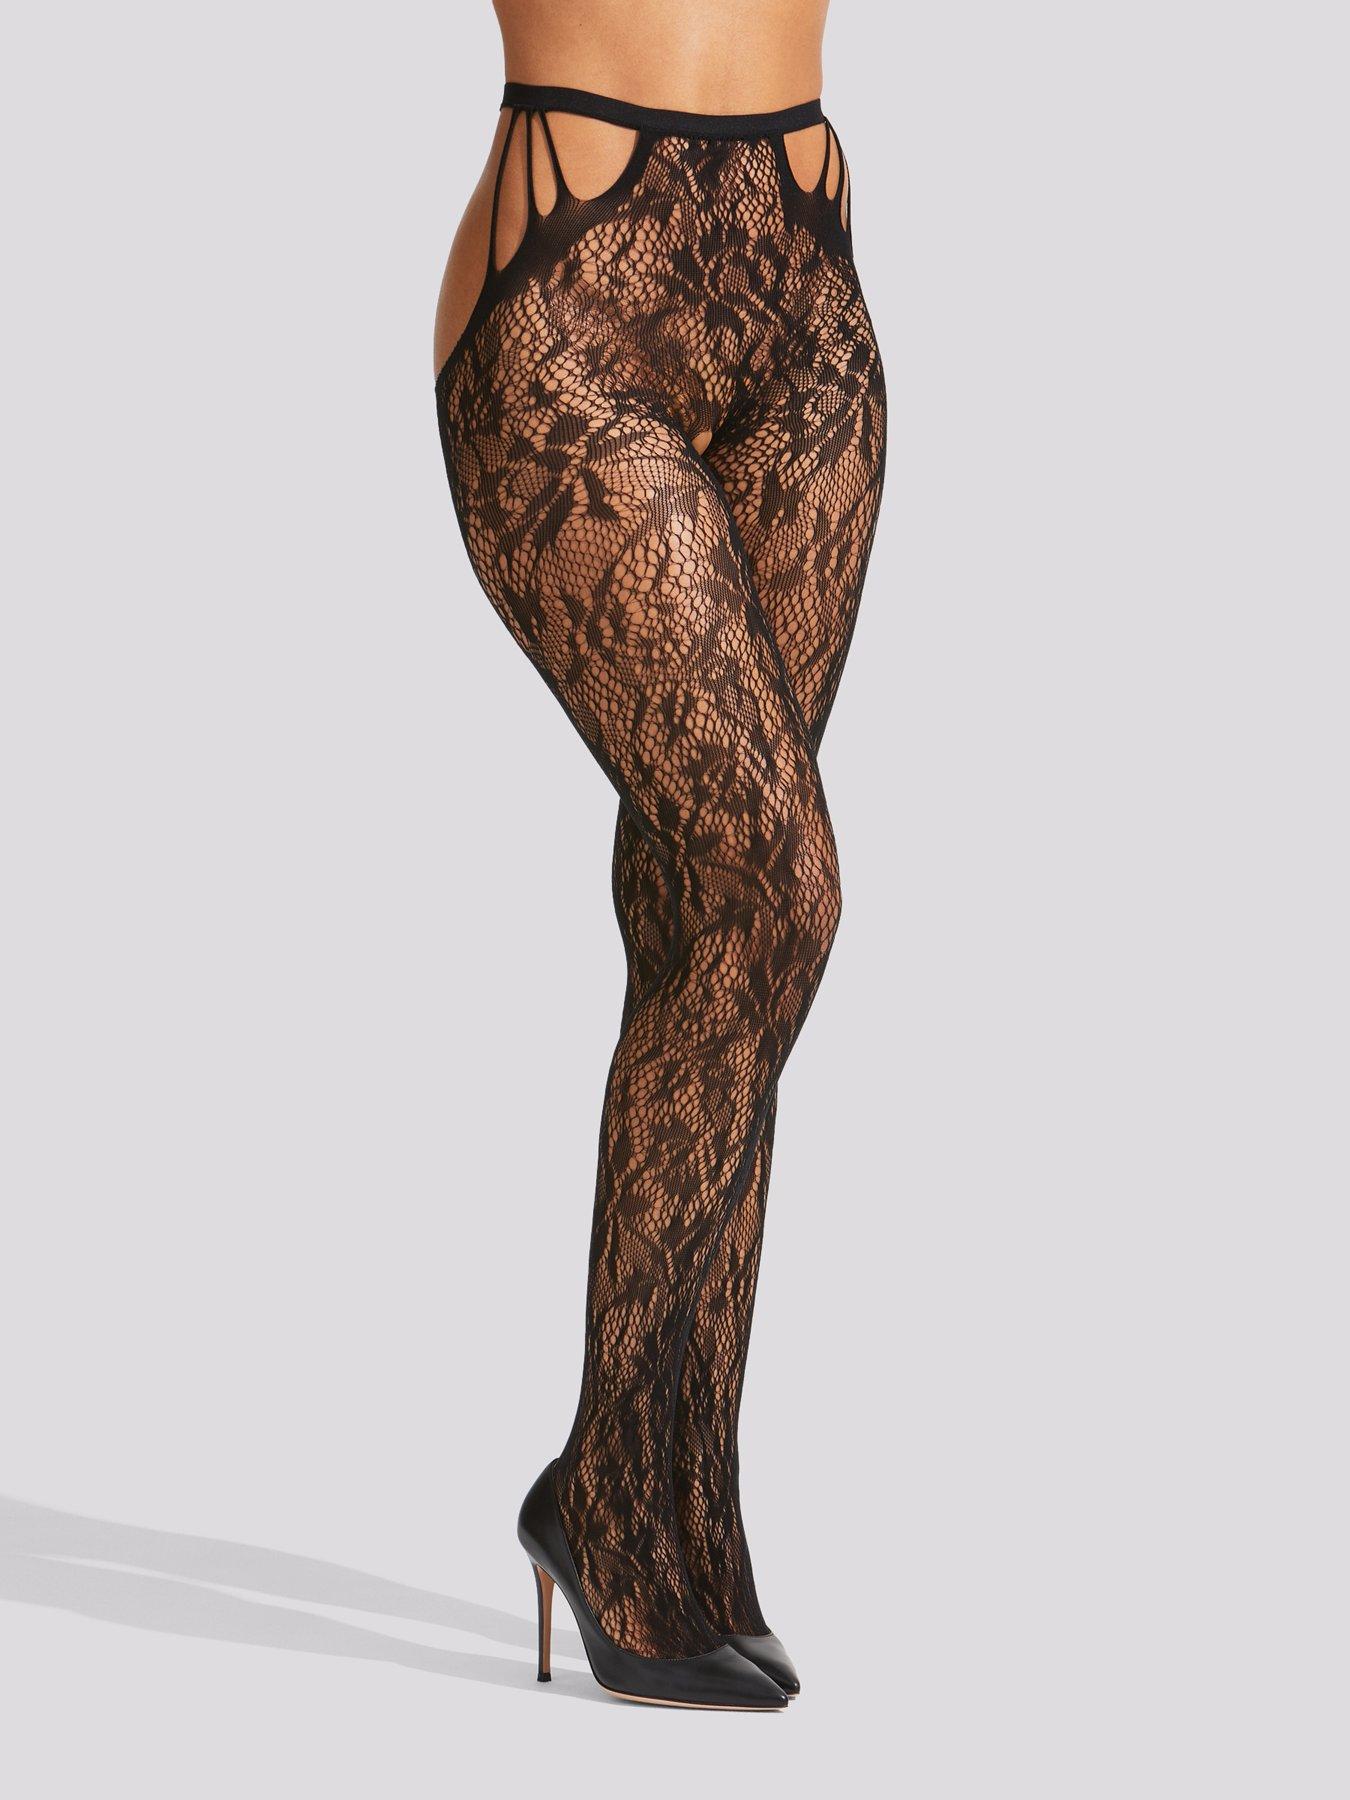 Ann Summers Hosiery Lace Strappy Crotchless Tights